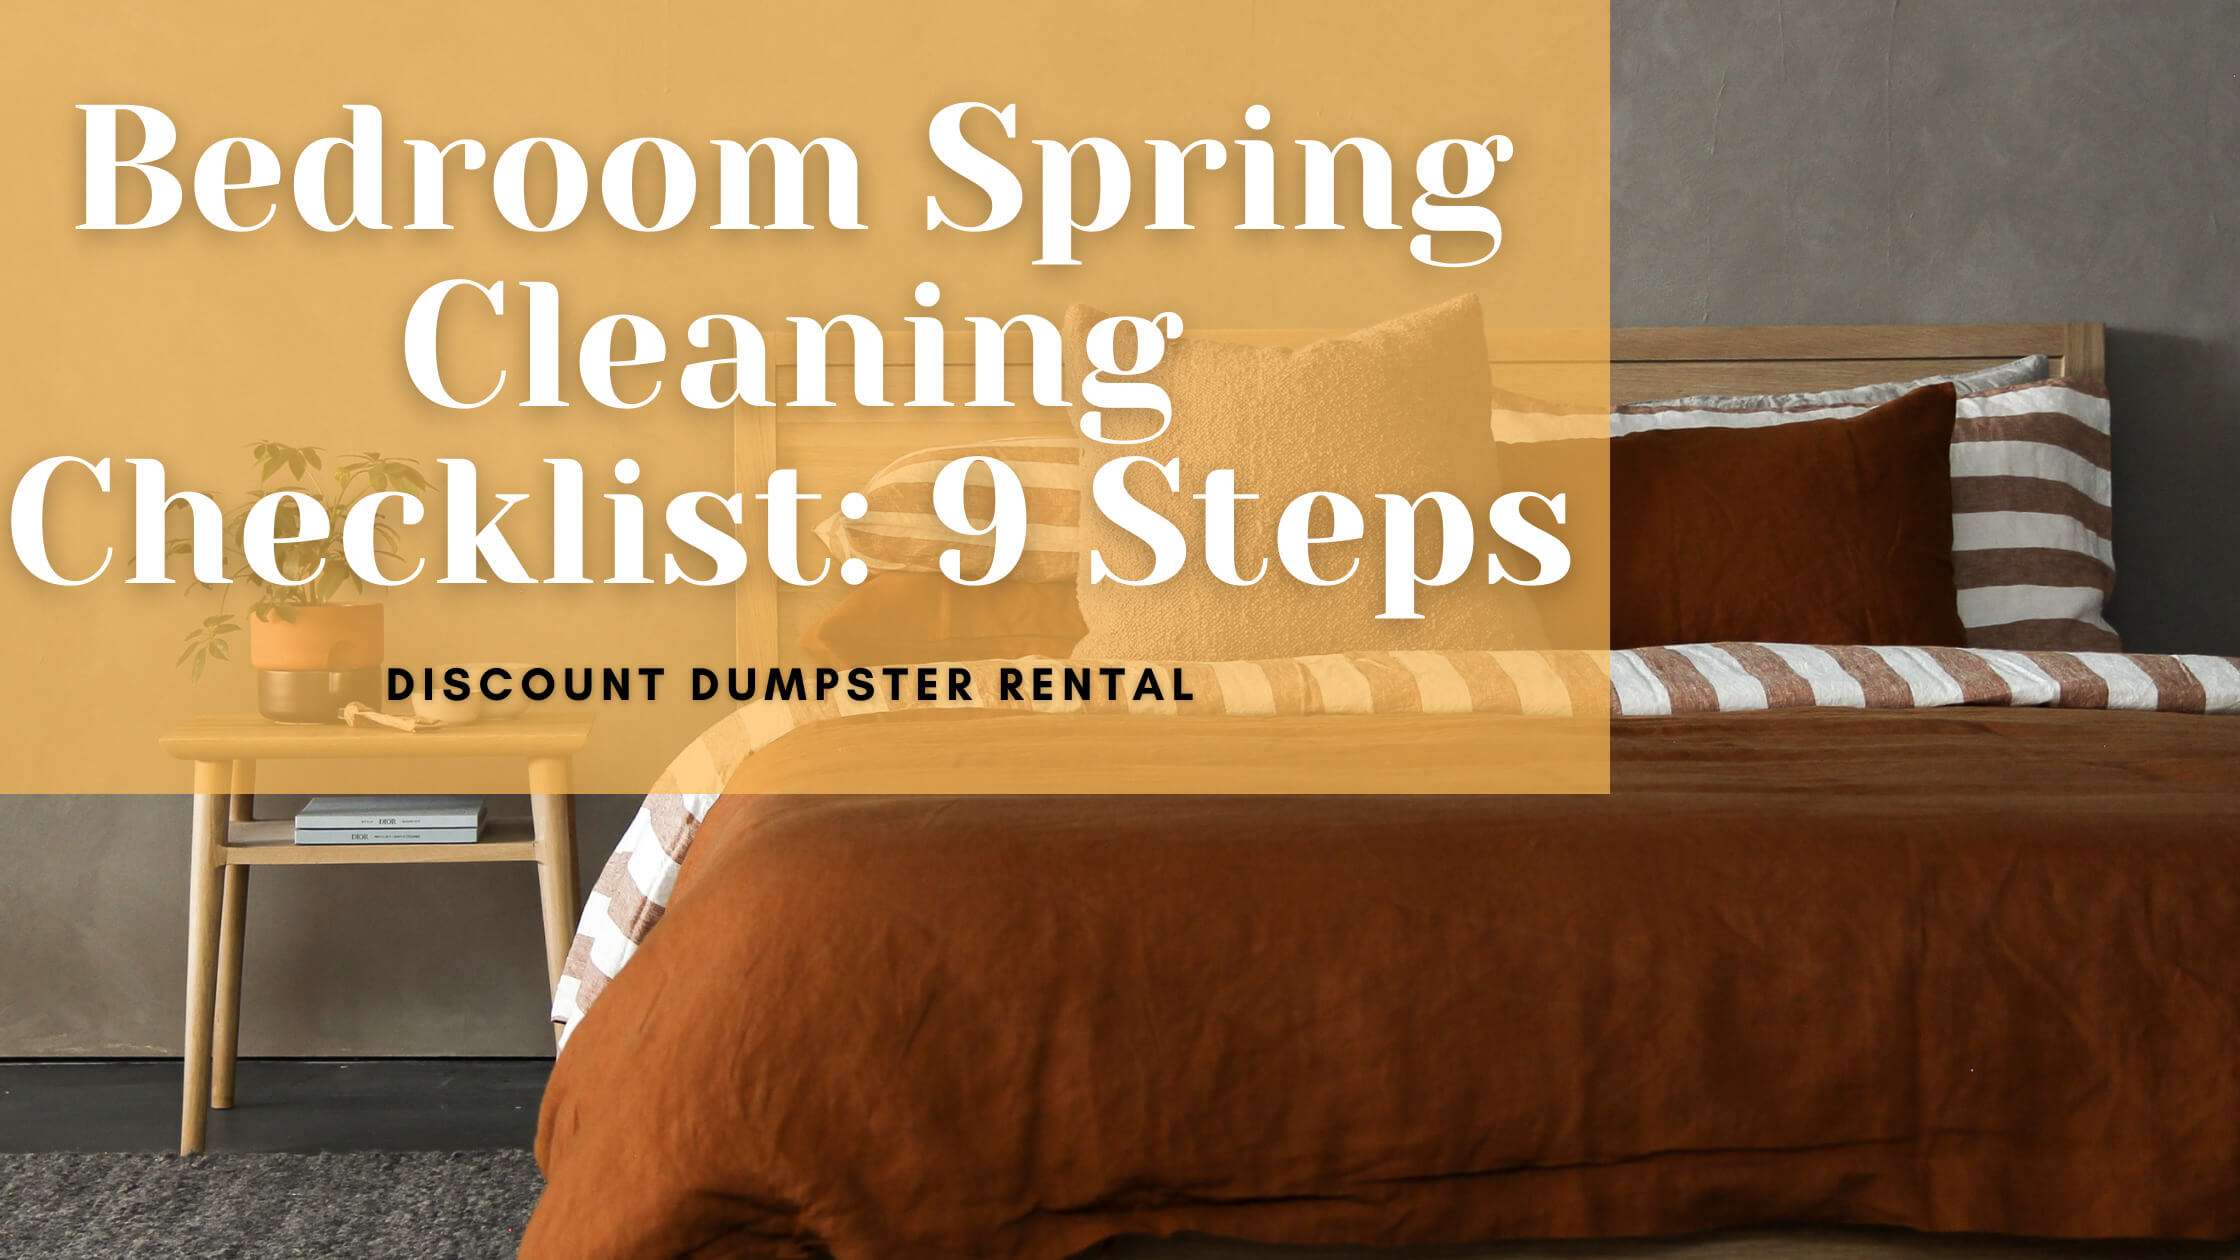 spring cleaning checklist room by room